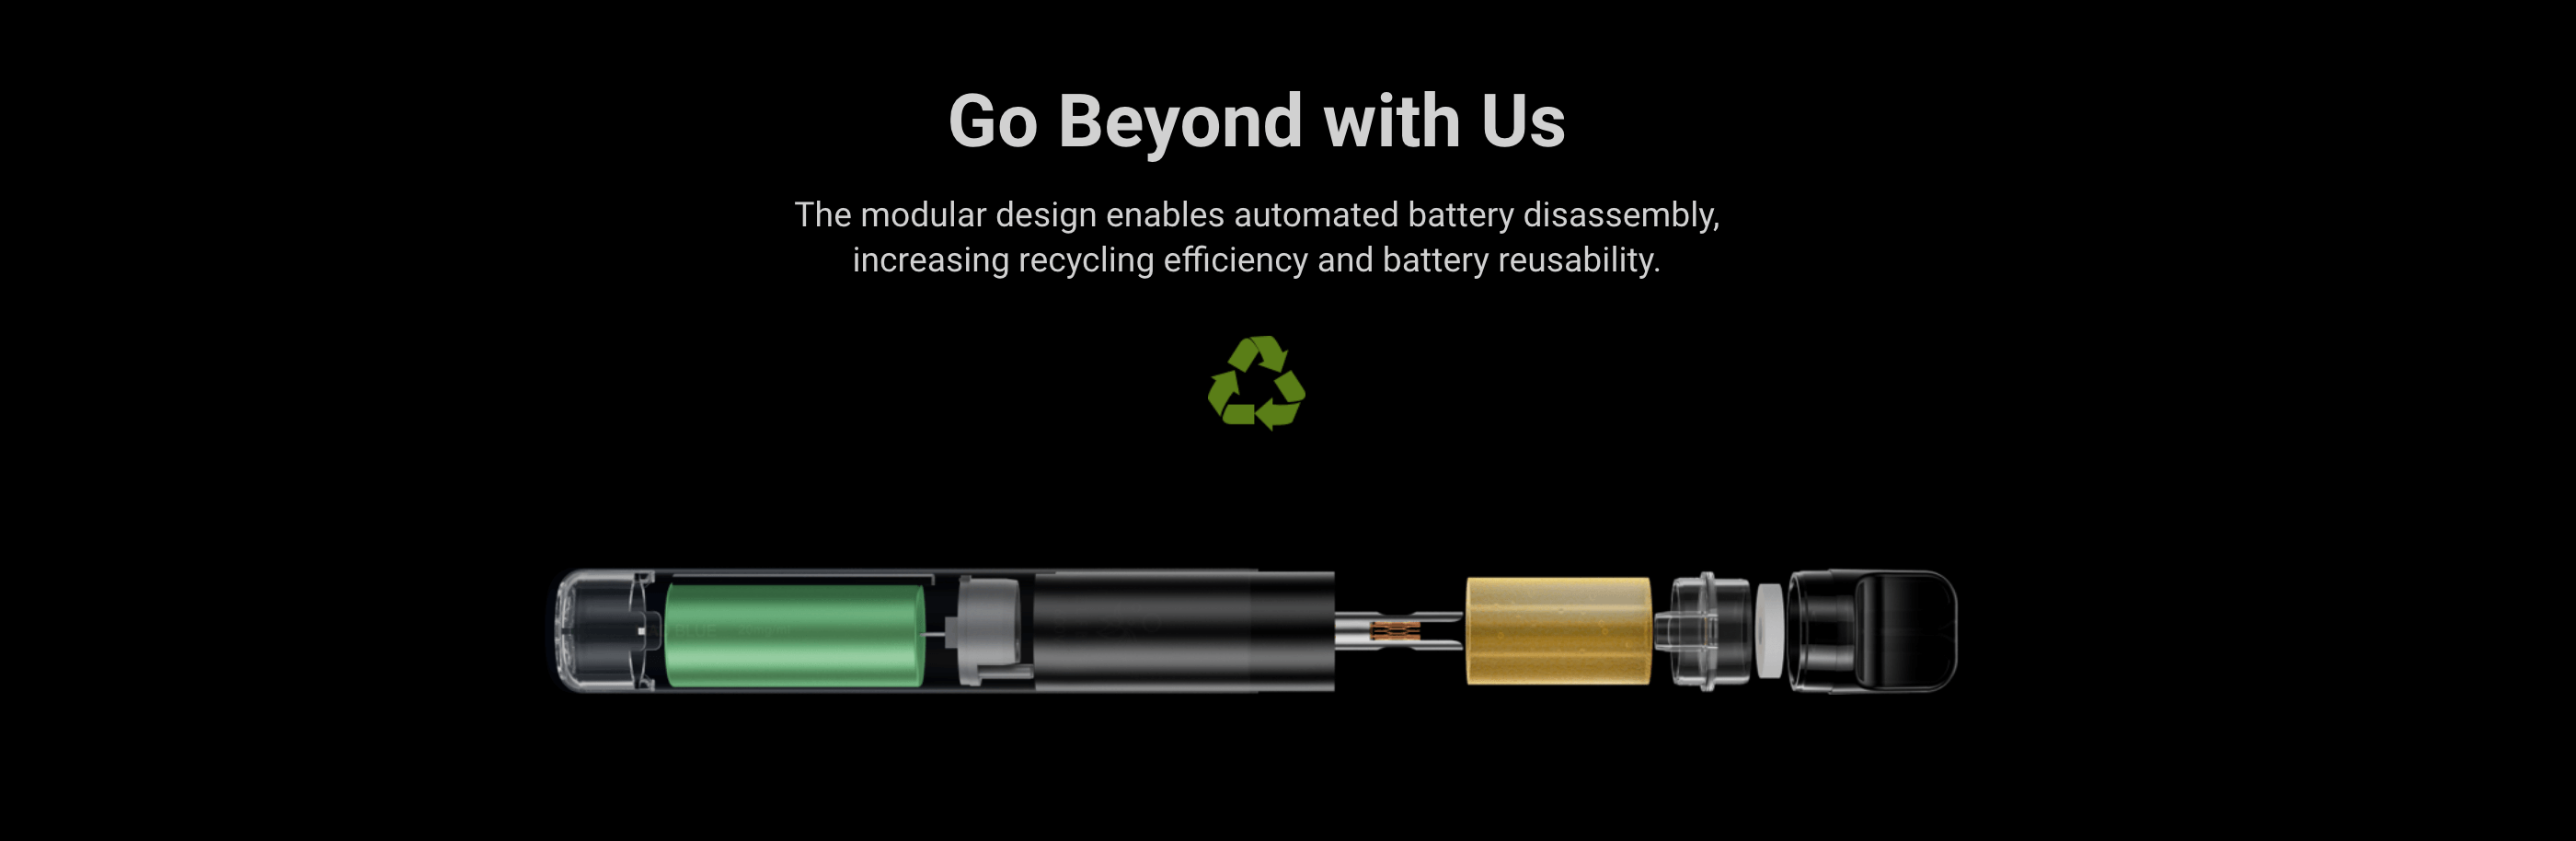 Elf Bar 600 v2 | Go Beyond with Us - modular design for easy disassembly for recycling